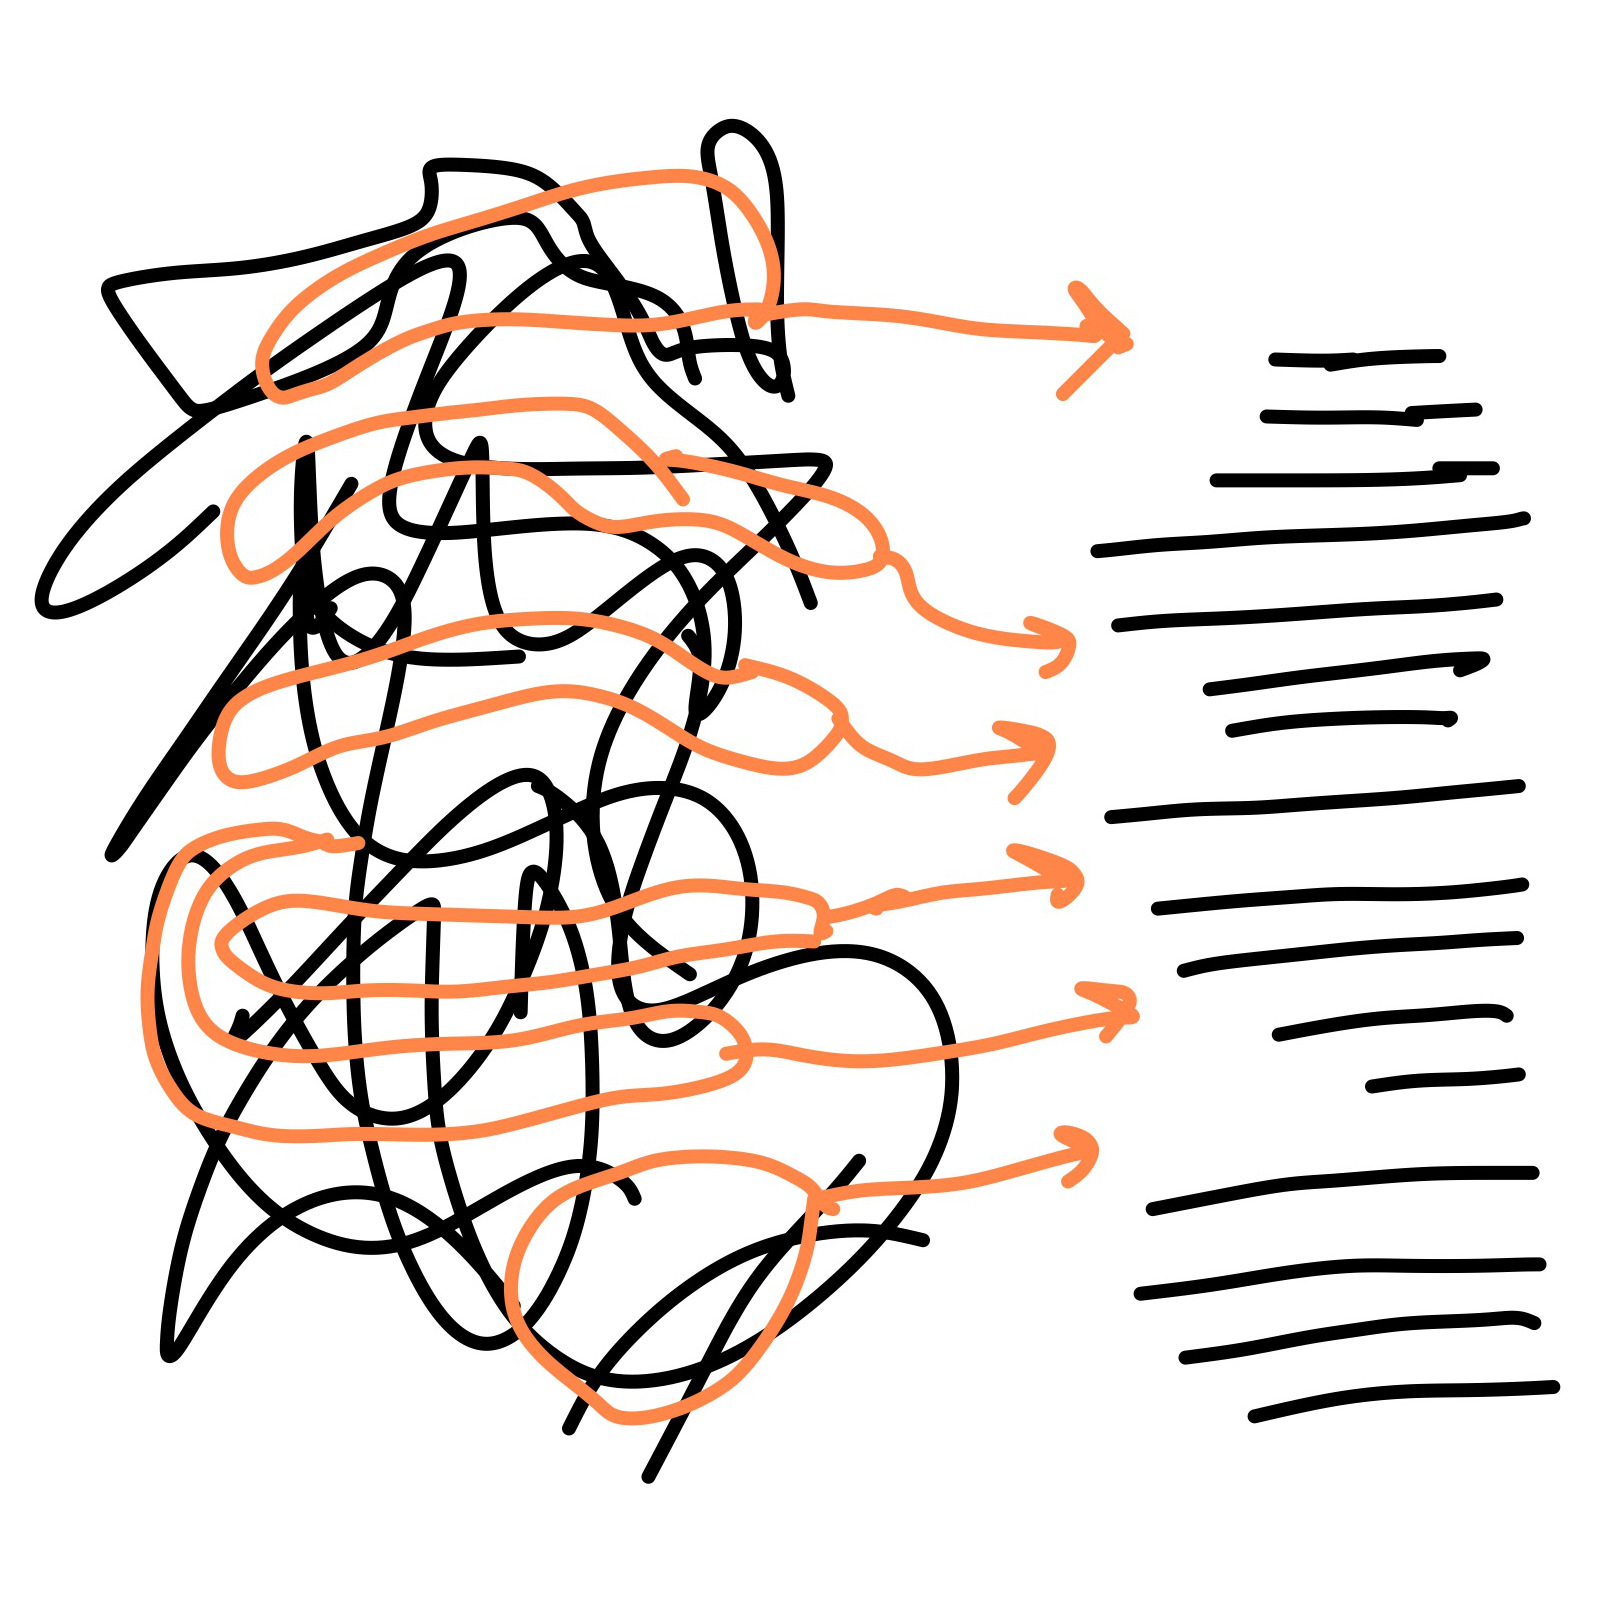 Scribbles turning into ordered lines